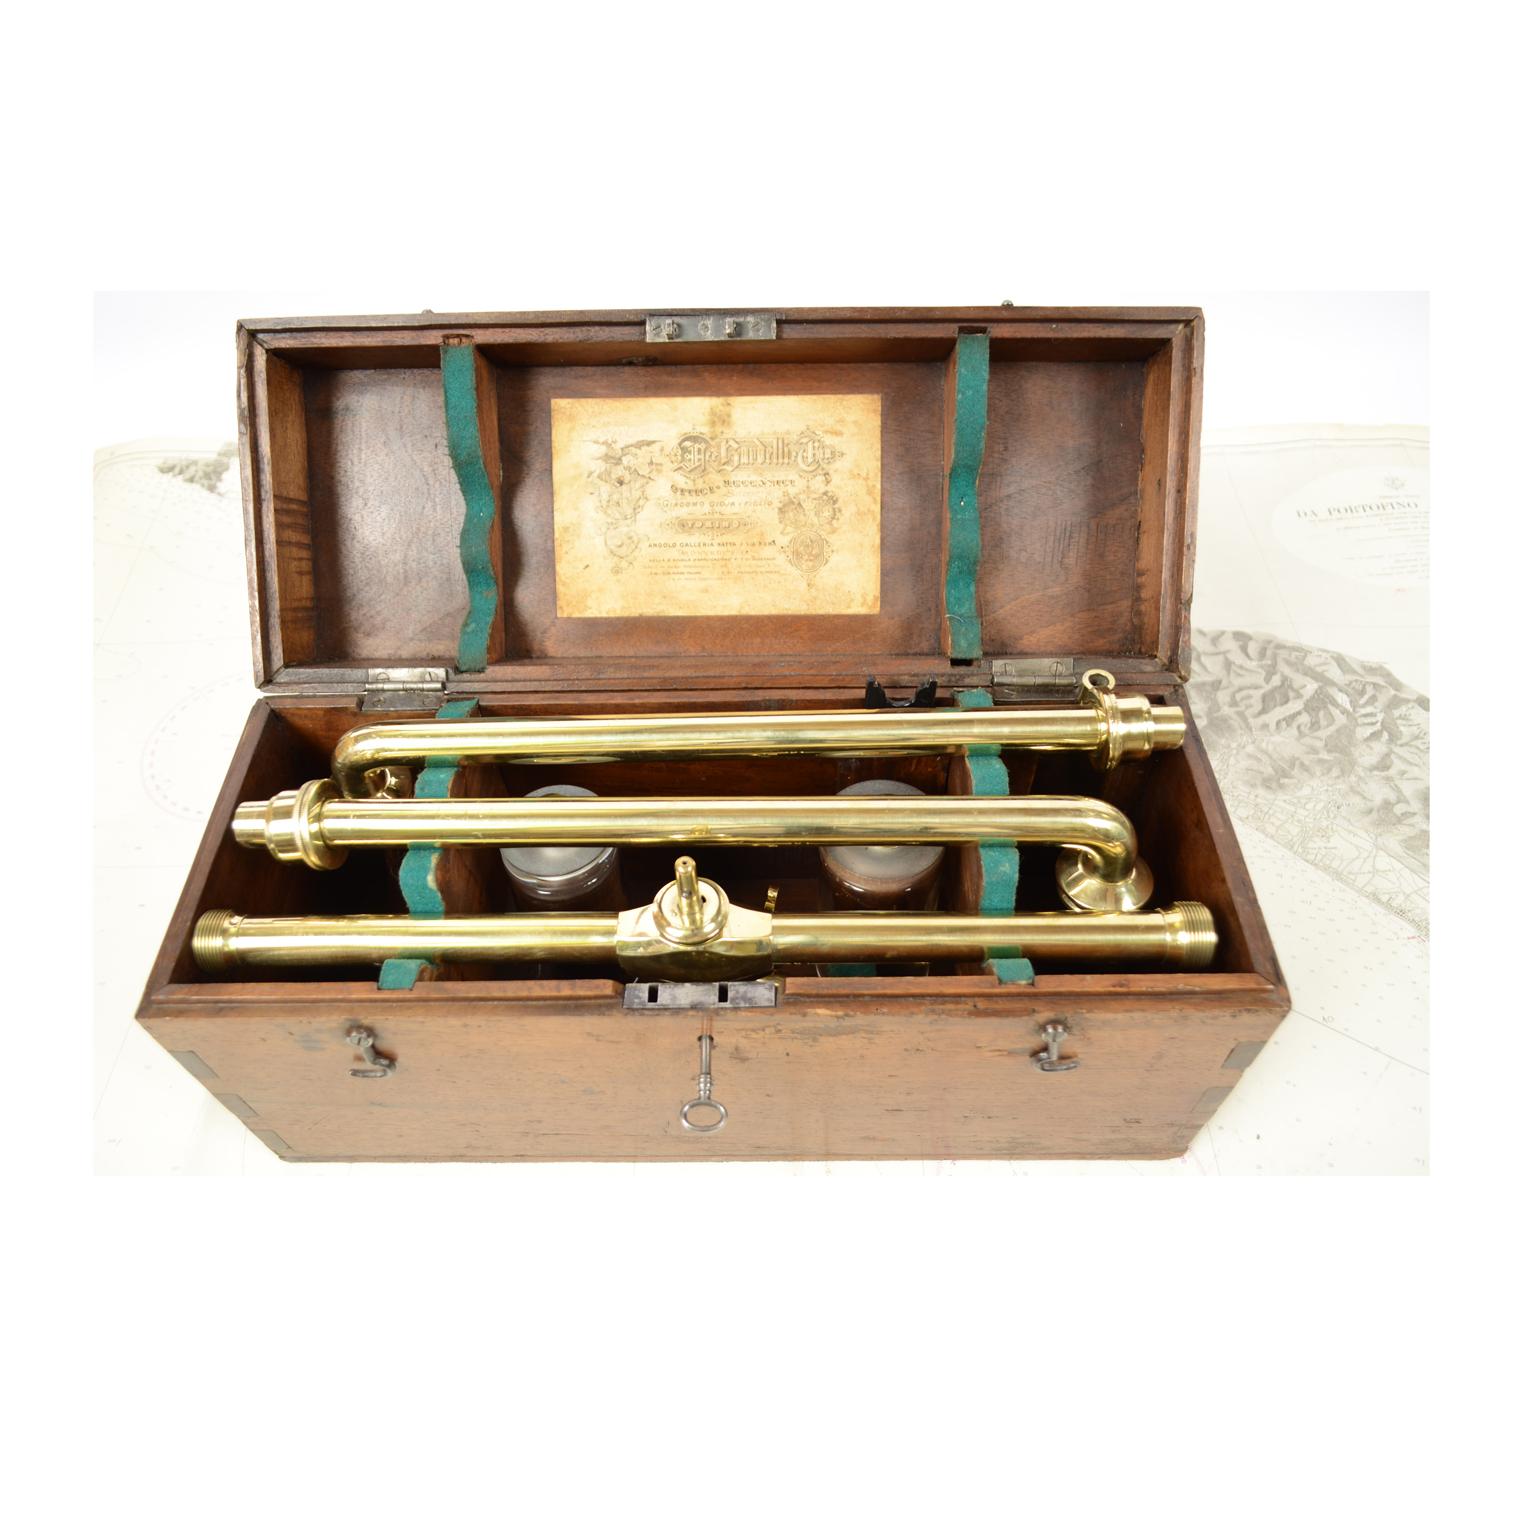 Water level made of brass and glass, complete with accessories and tripod signed A. Bardelli, second half of the 19th century. Very good condition. Measures: Width cm 107. Box cm 41.5 x 16 x 20.5.
 